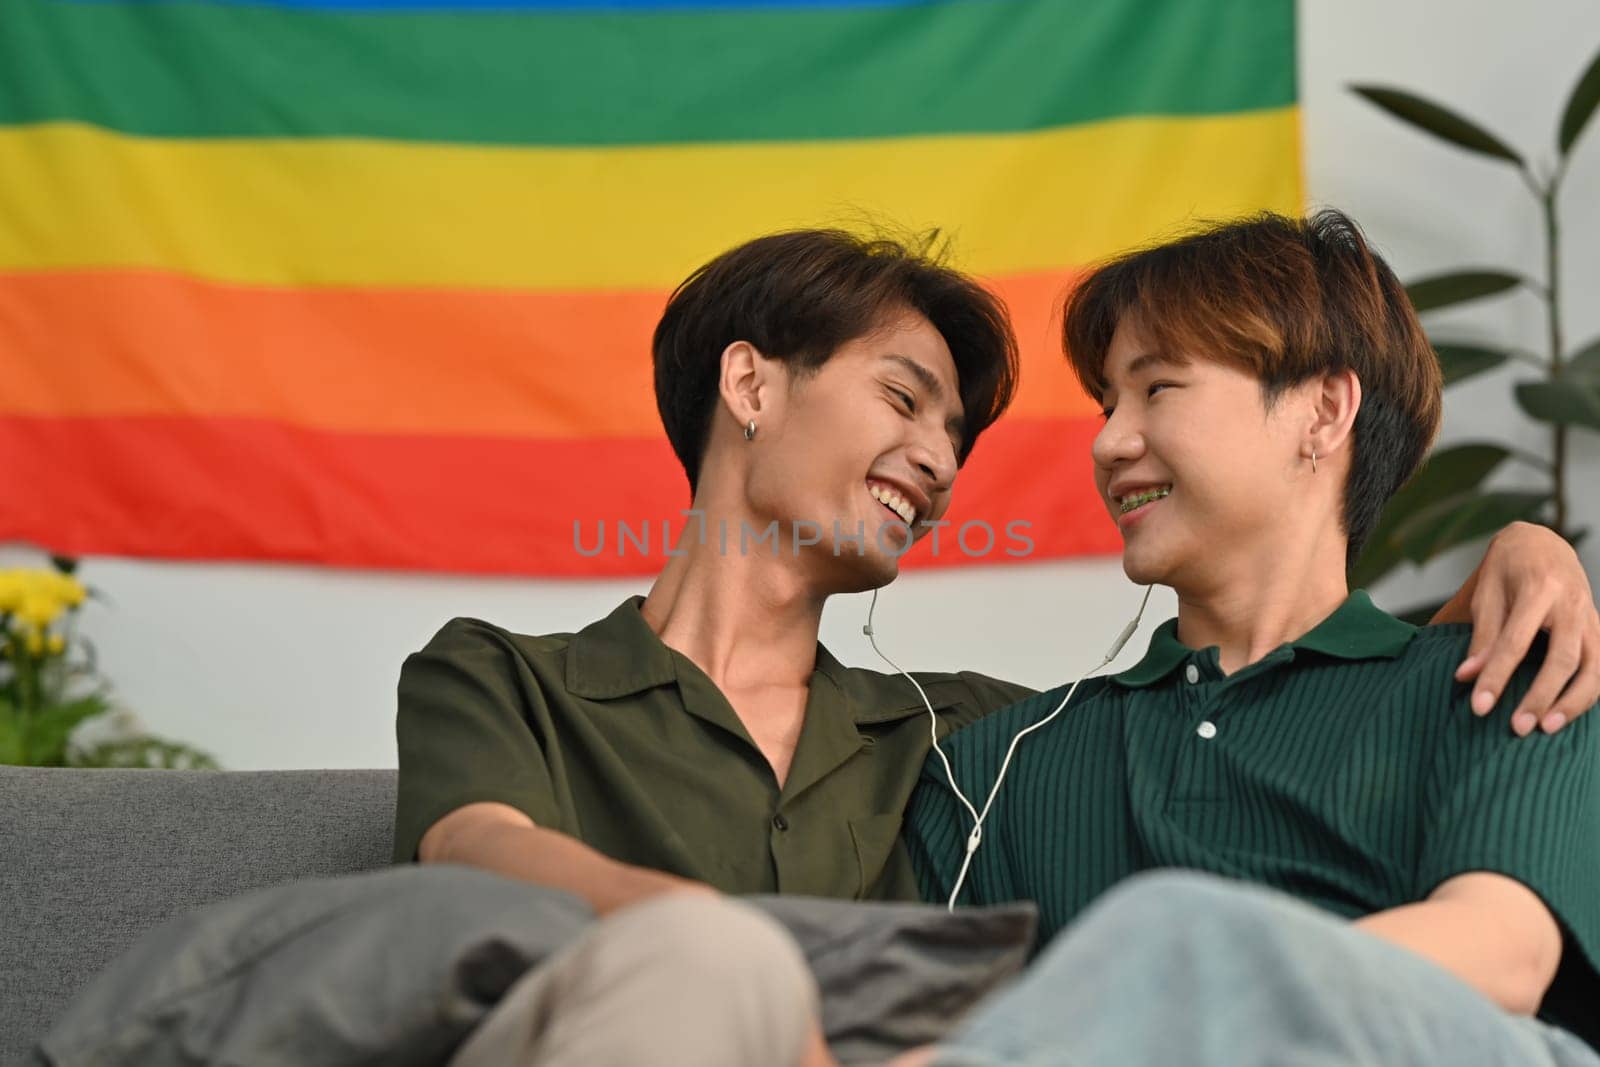 Carefree male gay couple listening to music on earphones, spending time together at home. LGBT, relationship and comfort living concept by prathanchorruangsak